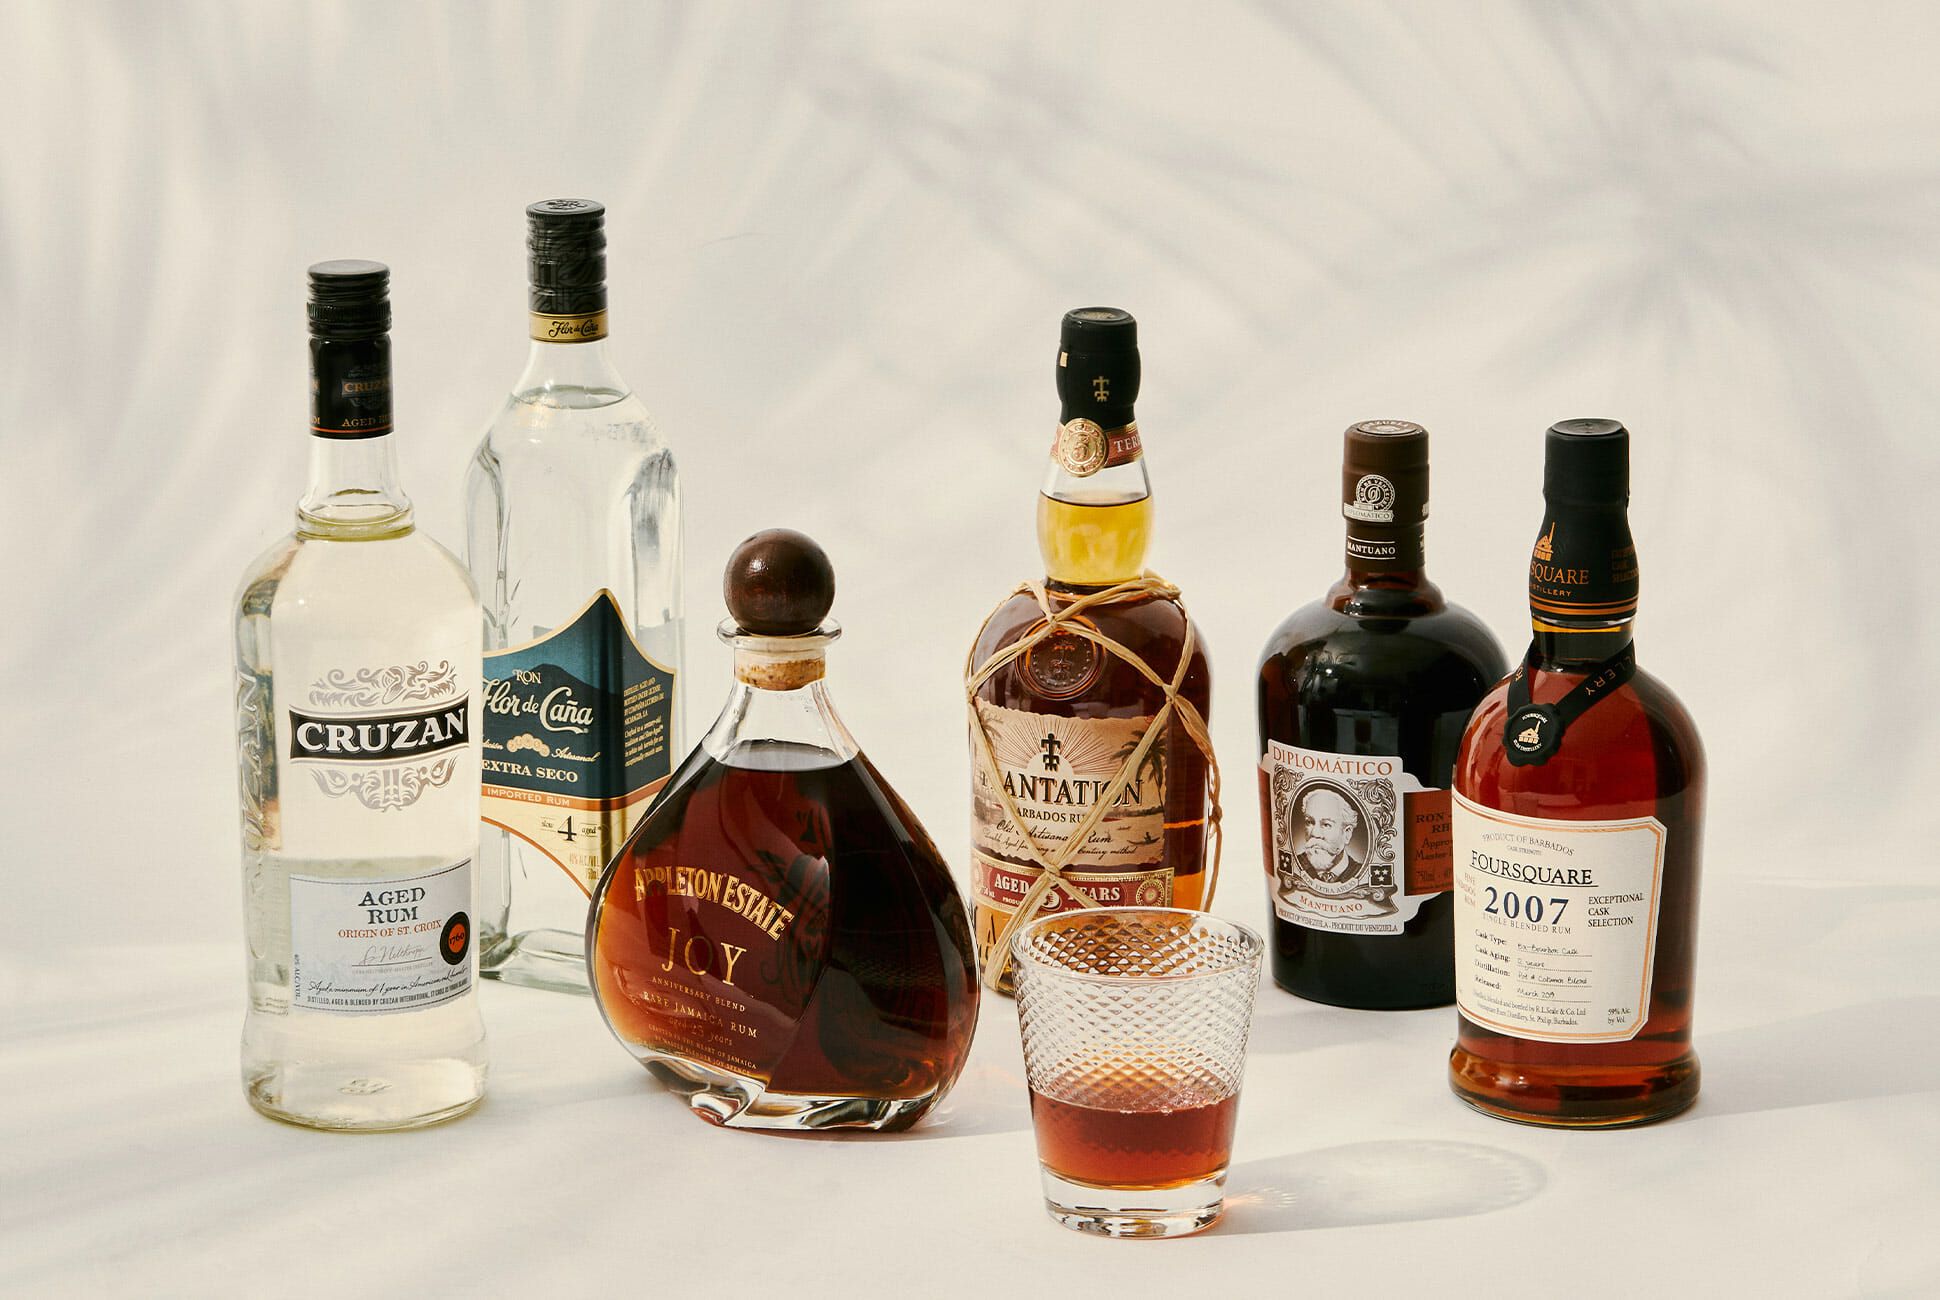 The 13 Best Bottles of Rums You Can Buy in 2021